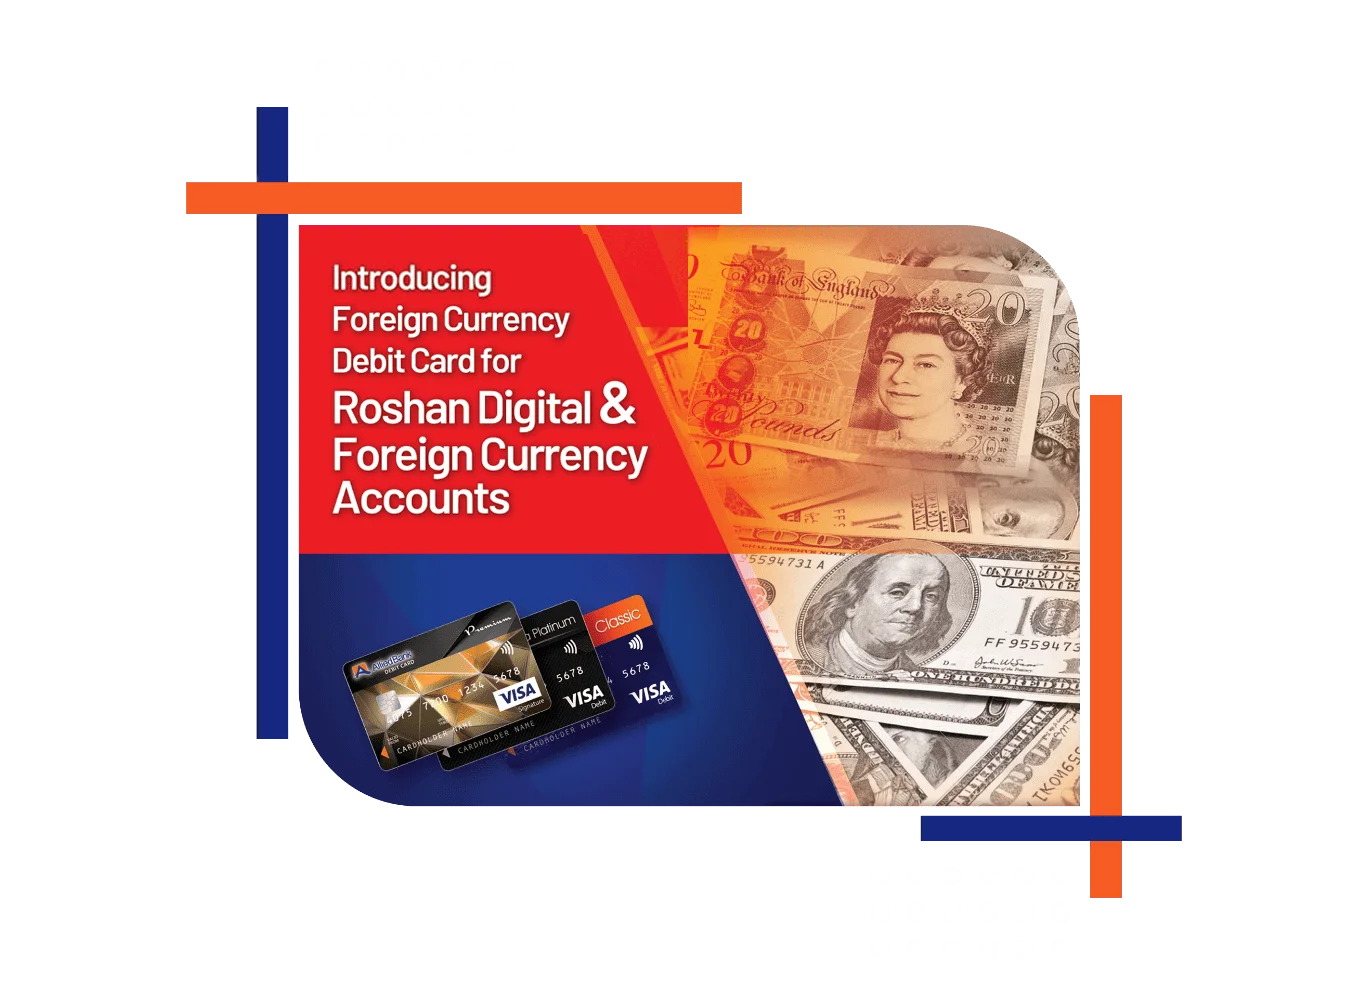 Allied Bank Foreign Currency Debit Cards are now available on USD, Euro and GBP Accounts